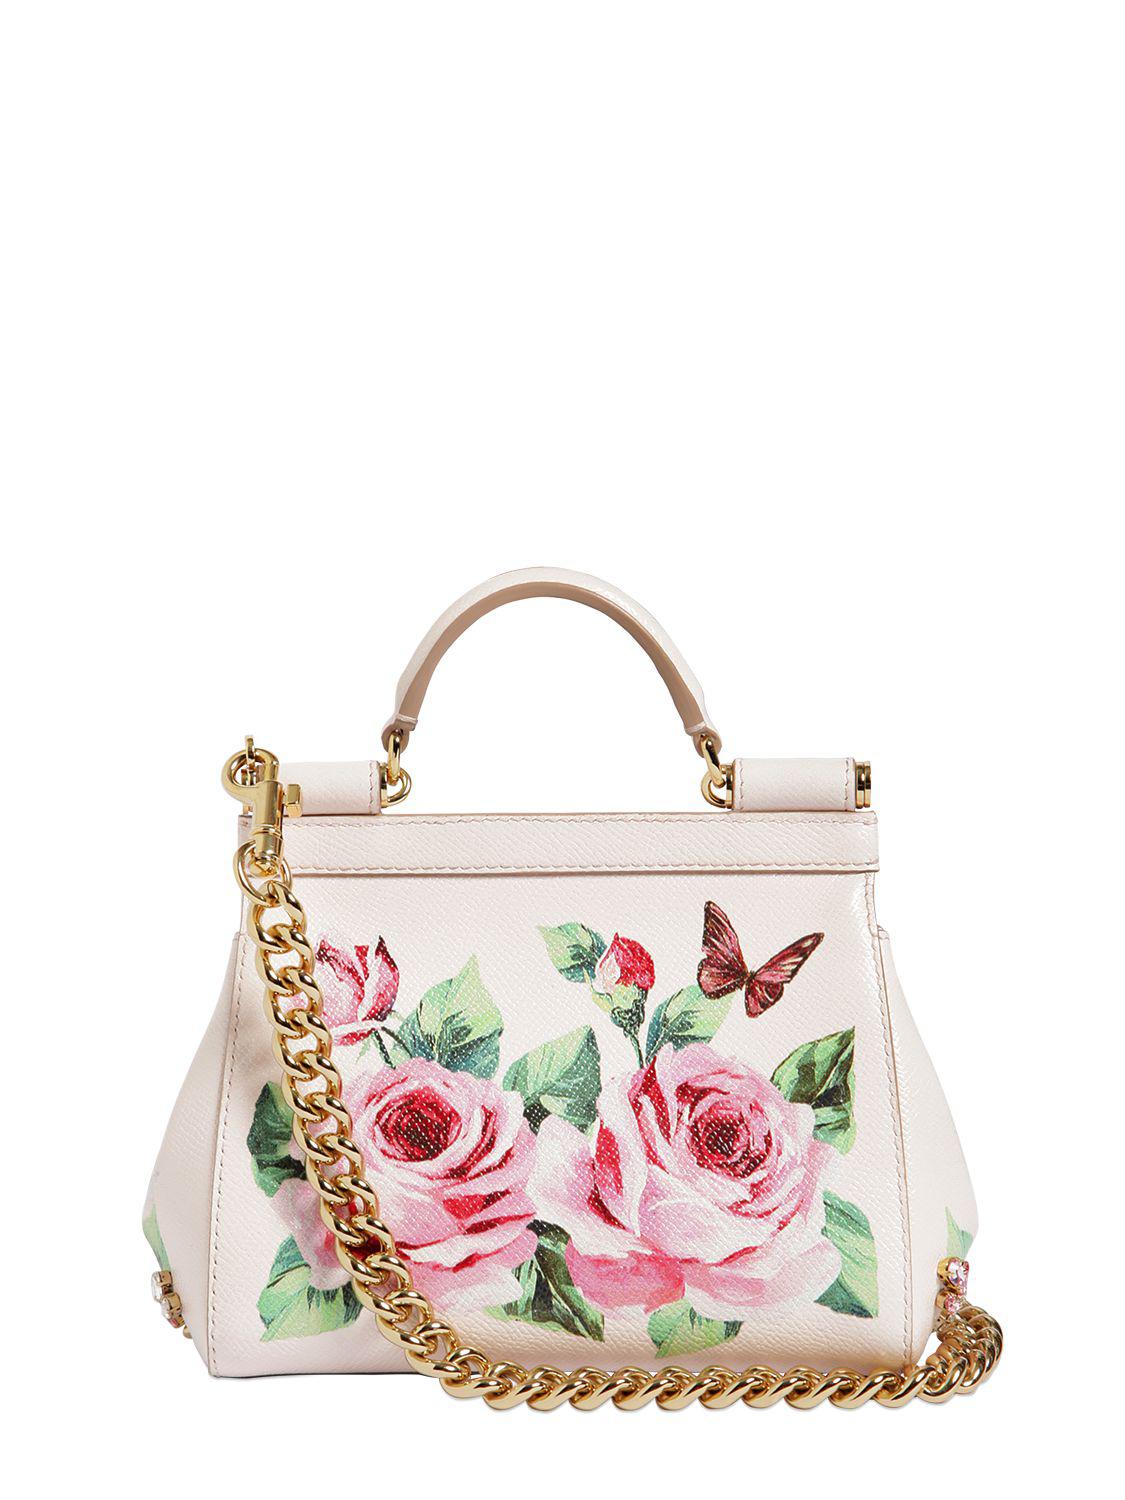 Dolce & Gabbana Small Sicily Rose Printed Leather Bag - Lyst